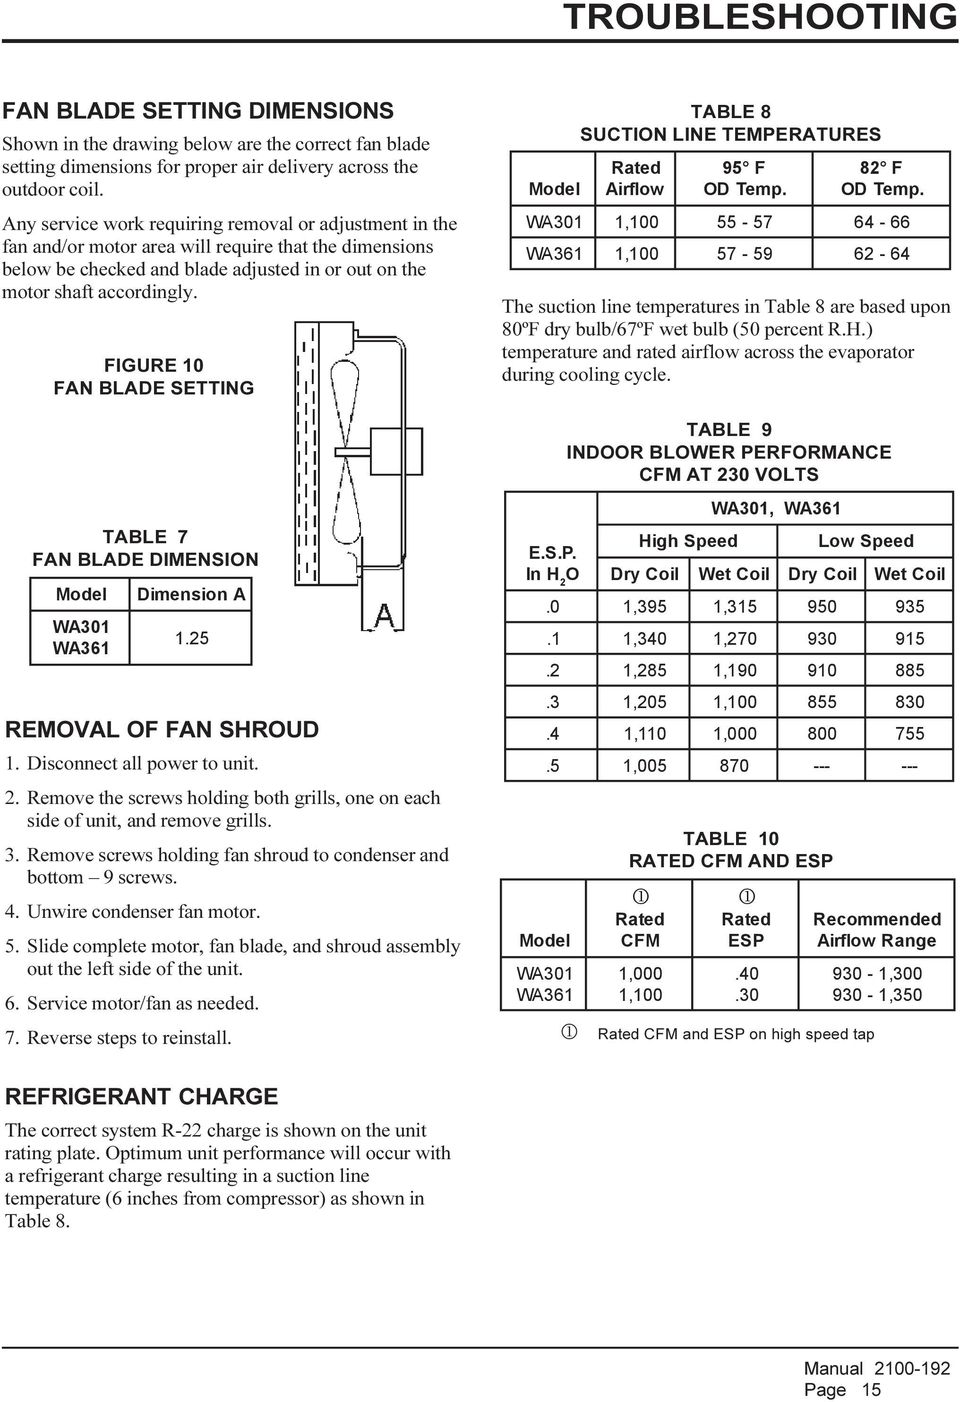 FIGURE FAN BLADE SETTING Model TABLE SUCTION LINE TEMPERATURES Rated Airflow 95 F OD Temp. 2 F OD Temp.